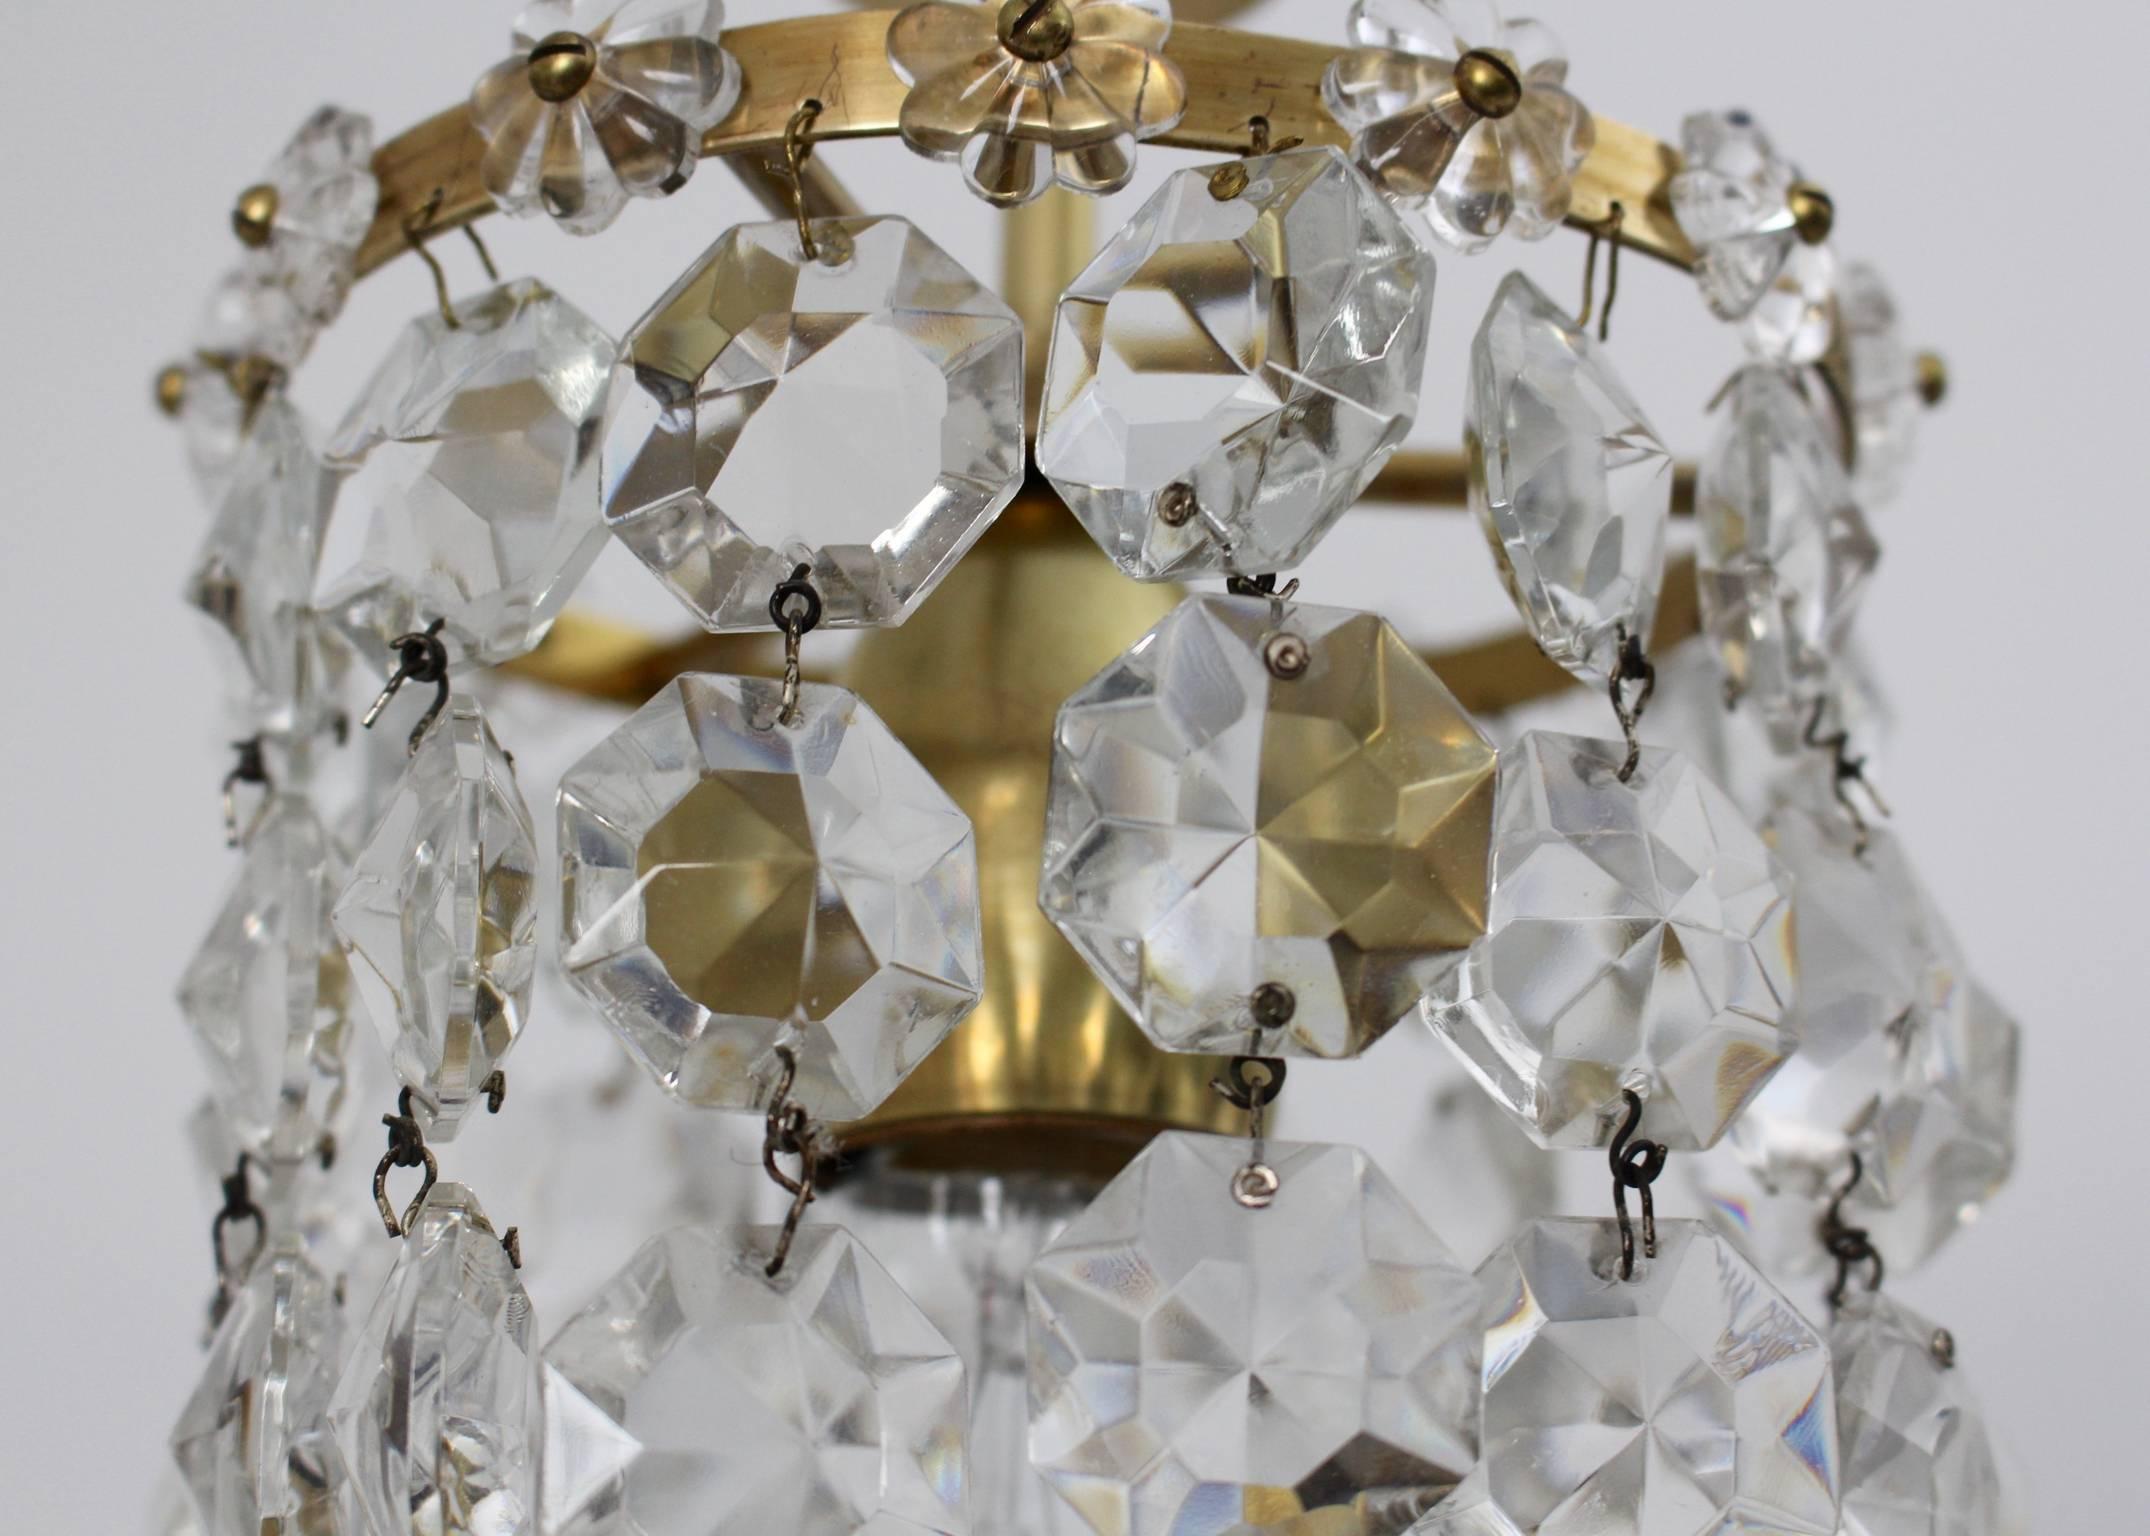 Mid Century Modern Crystal Glass Chandelier by Bakalowits & Soehne Vienna, 1950s For Sale 2